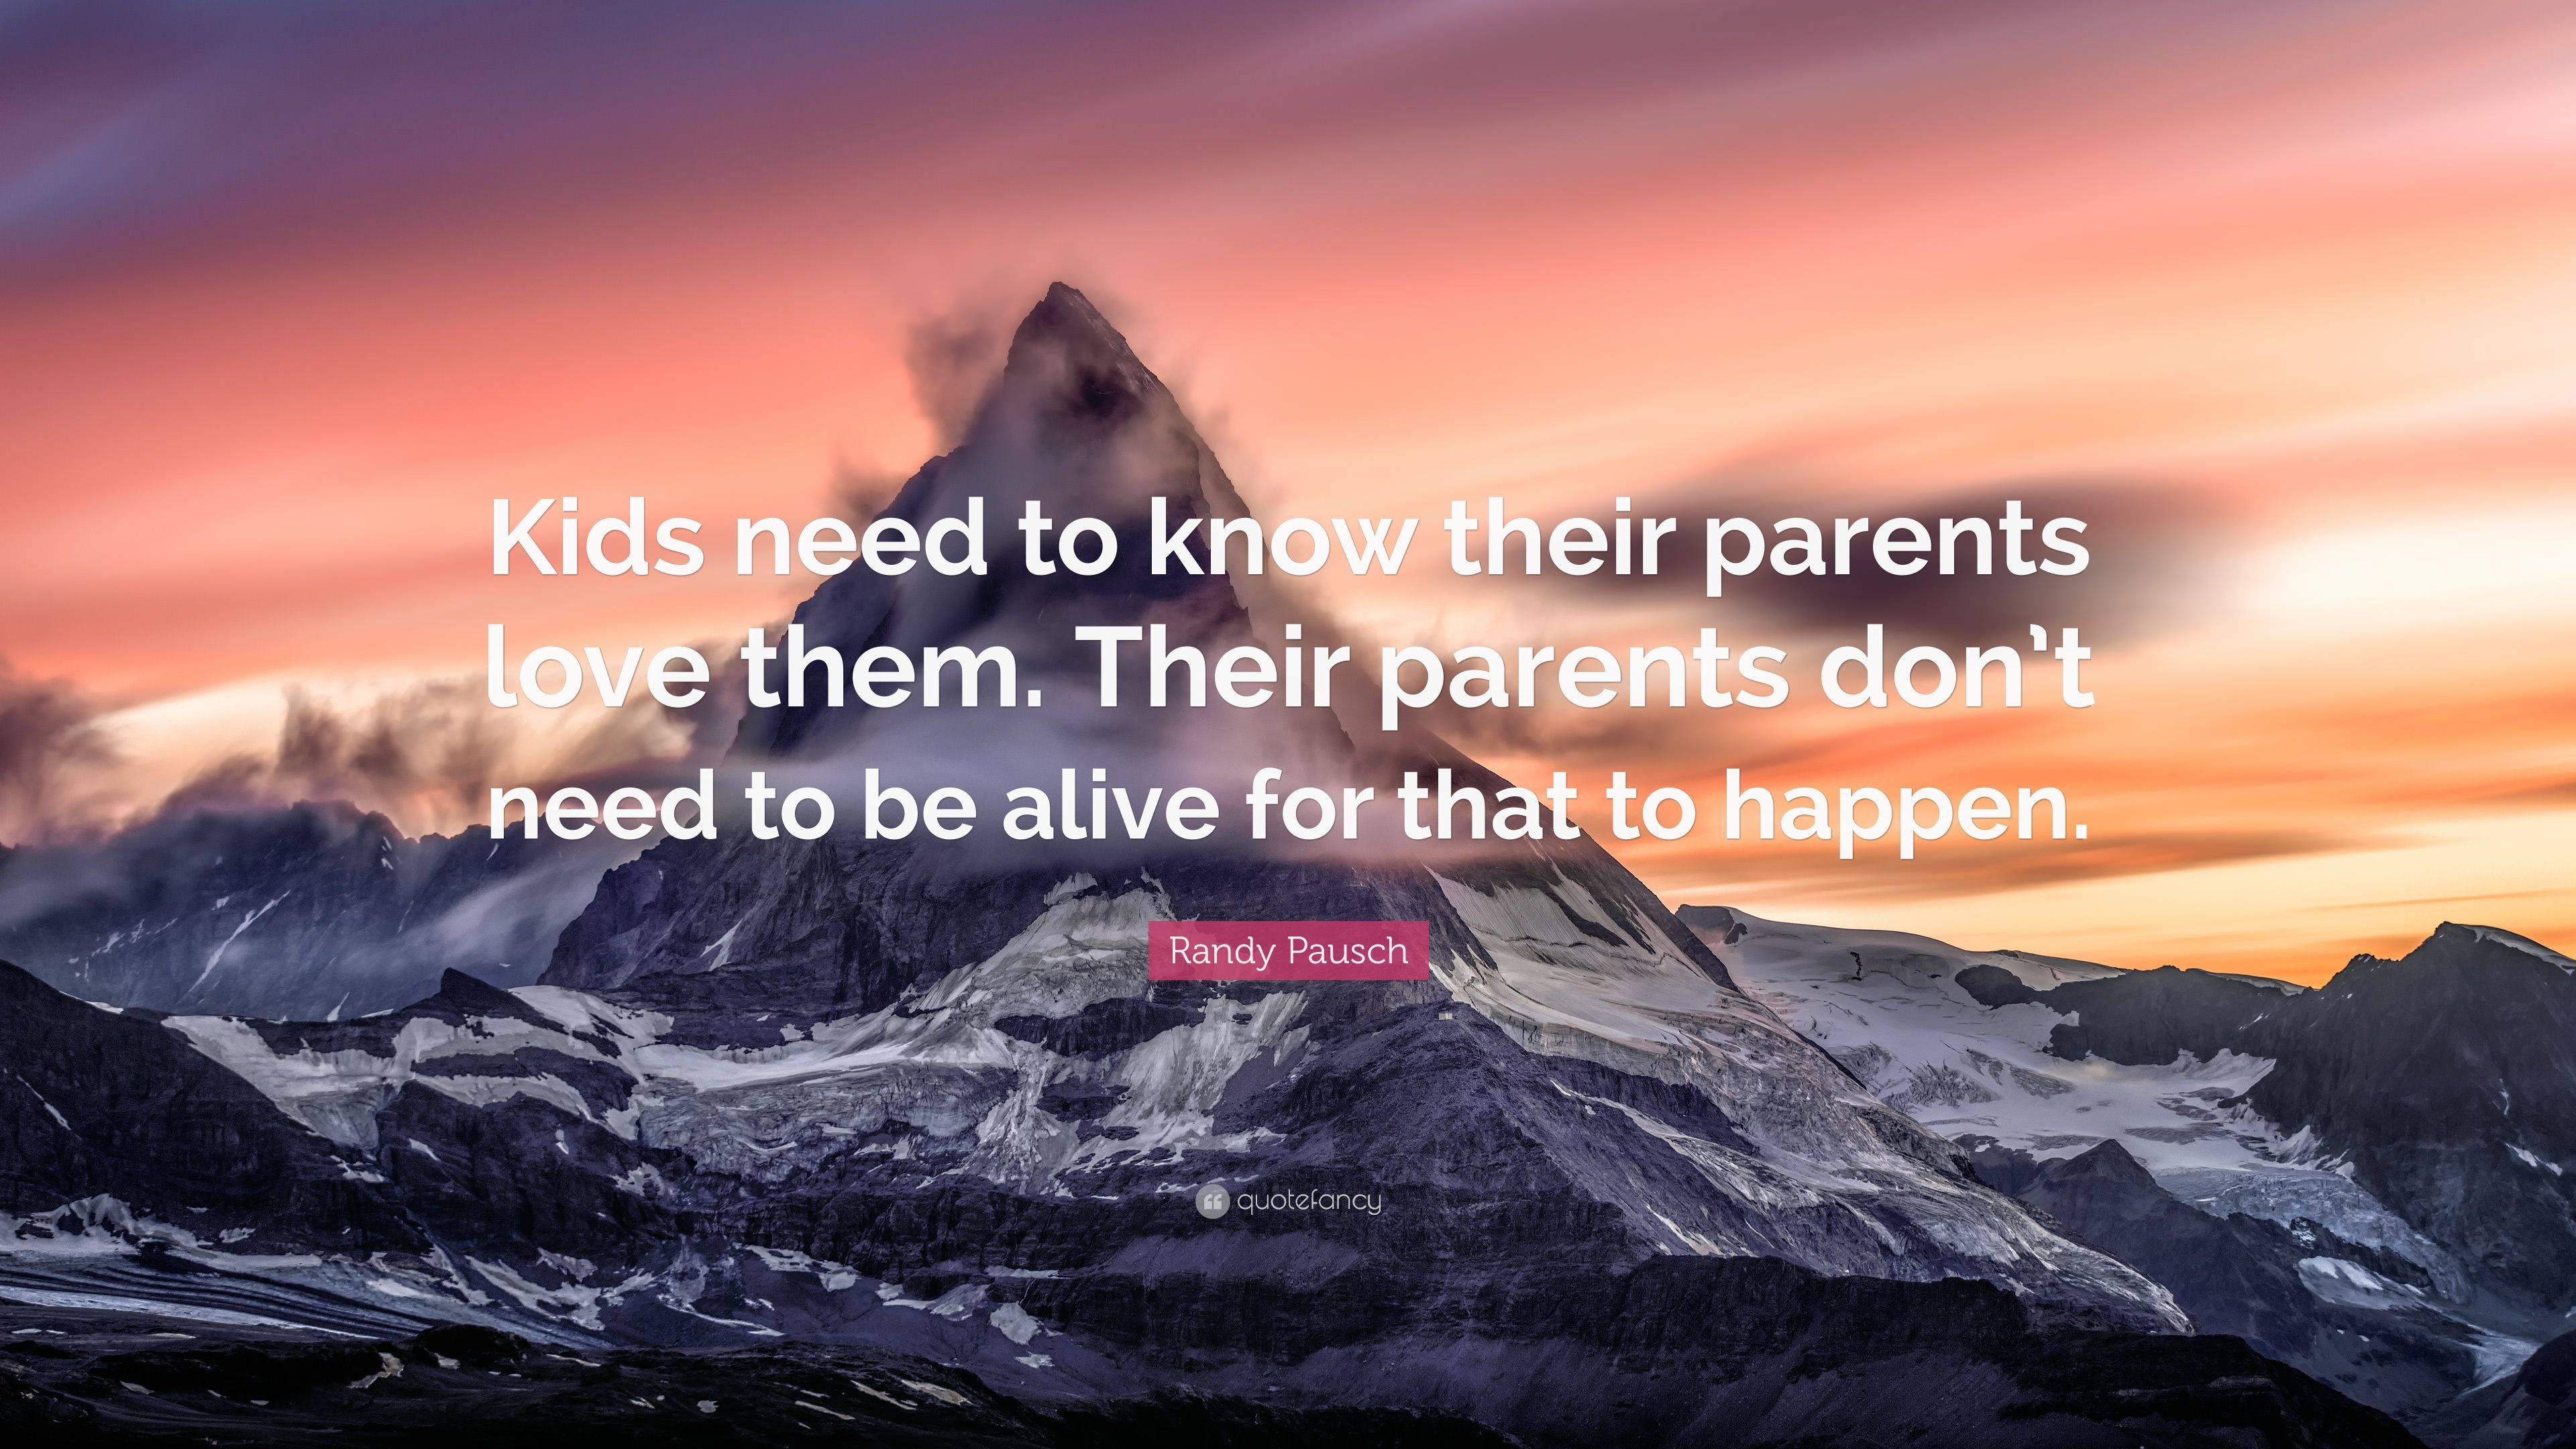 Randy Pausch Quote: “Kids need to know .quotefancy.com